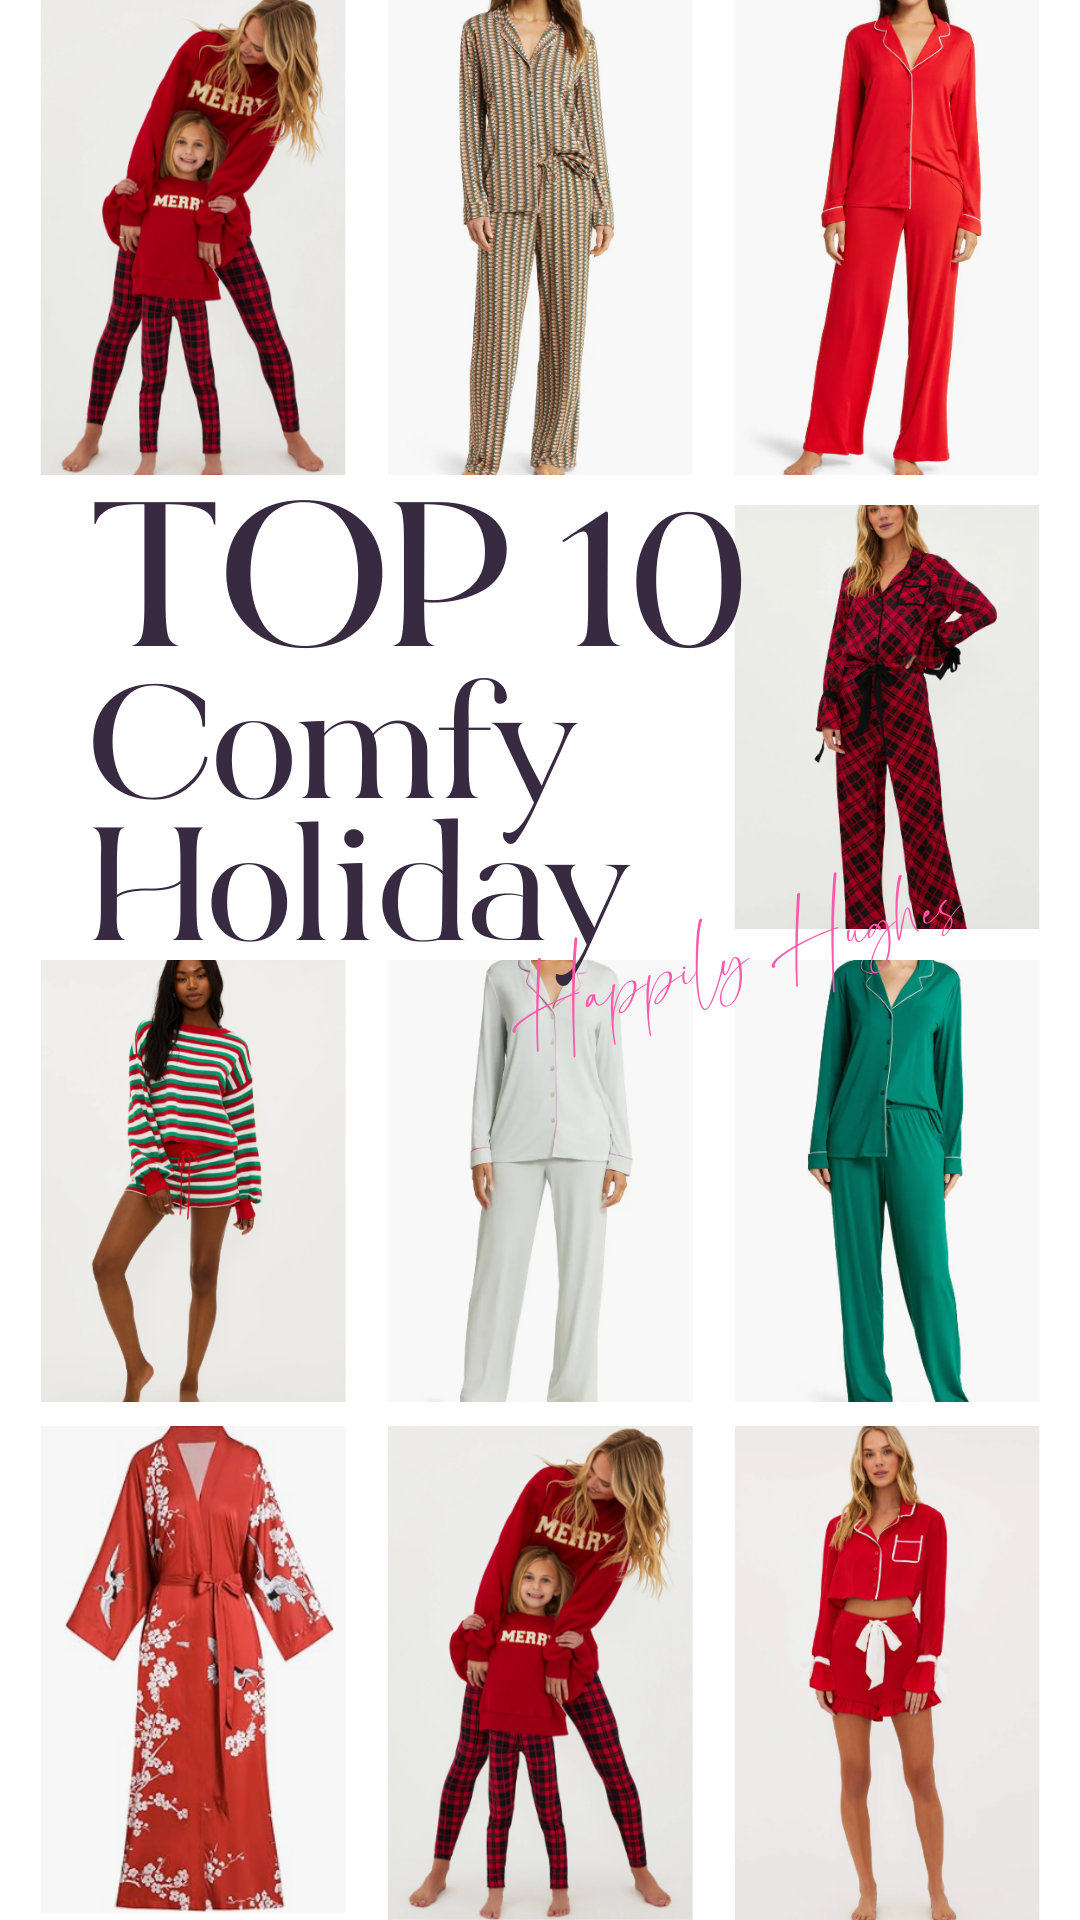 Top 10 Holiday Comfy Outfits for the Whole Family